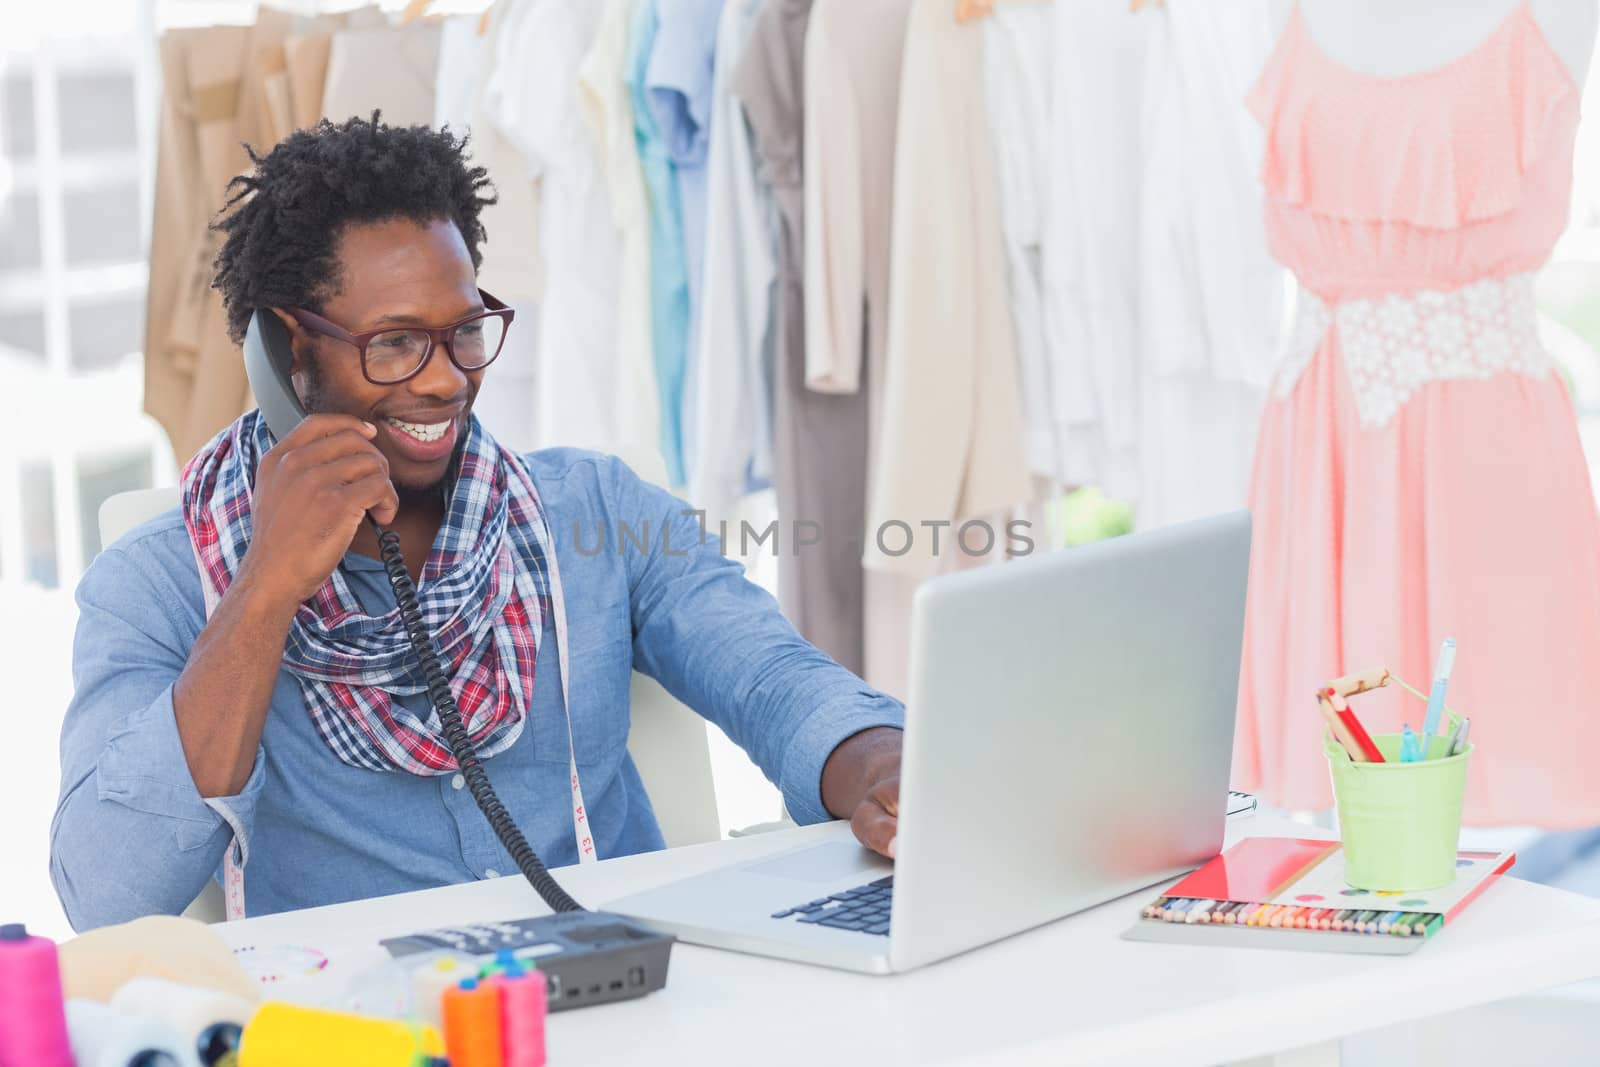 Attractive fashion designer speaking on the phone in a creative office